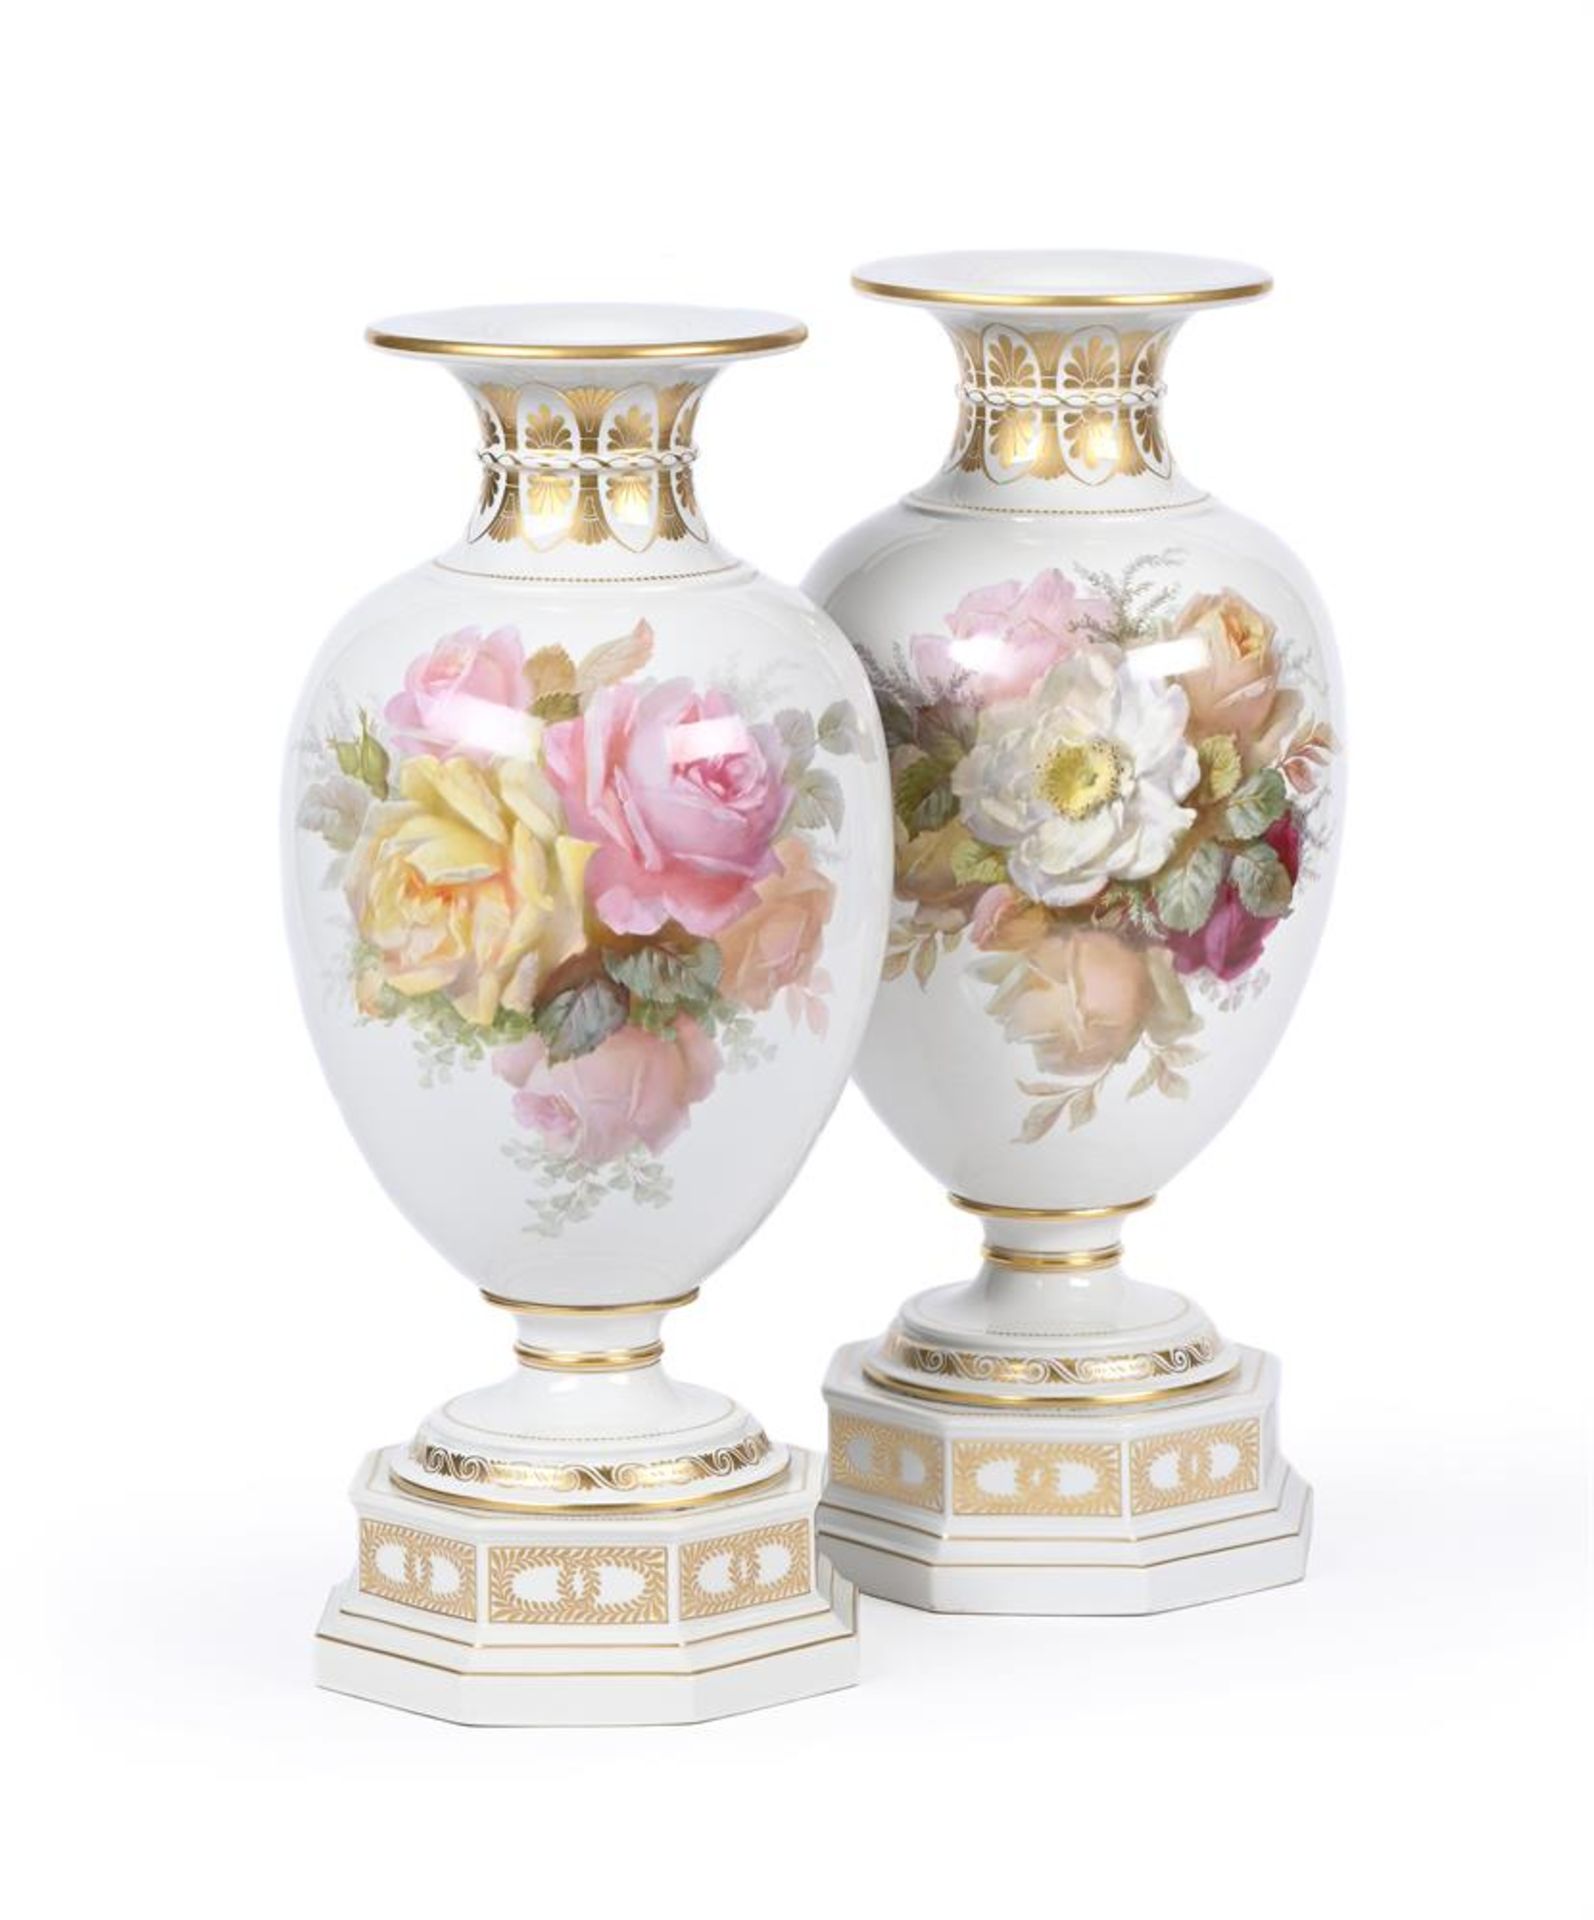 A VERY NEAR PAIR OF BERLIN (KPM) PORCELAIN VASESCIRCA 1900Each painted with bouquets of roses - Bild 3 aus 6